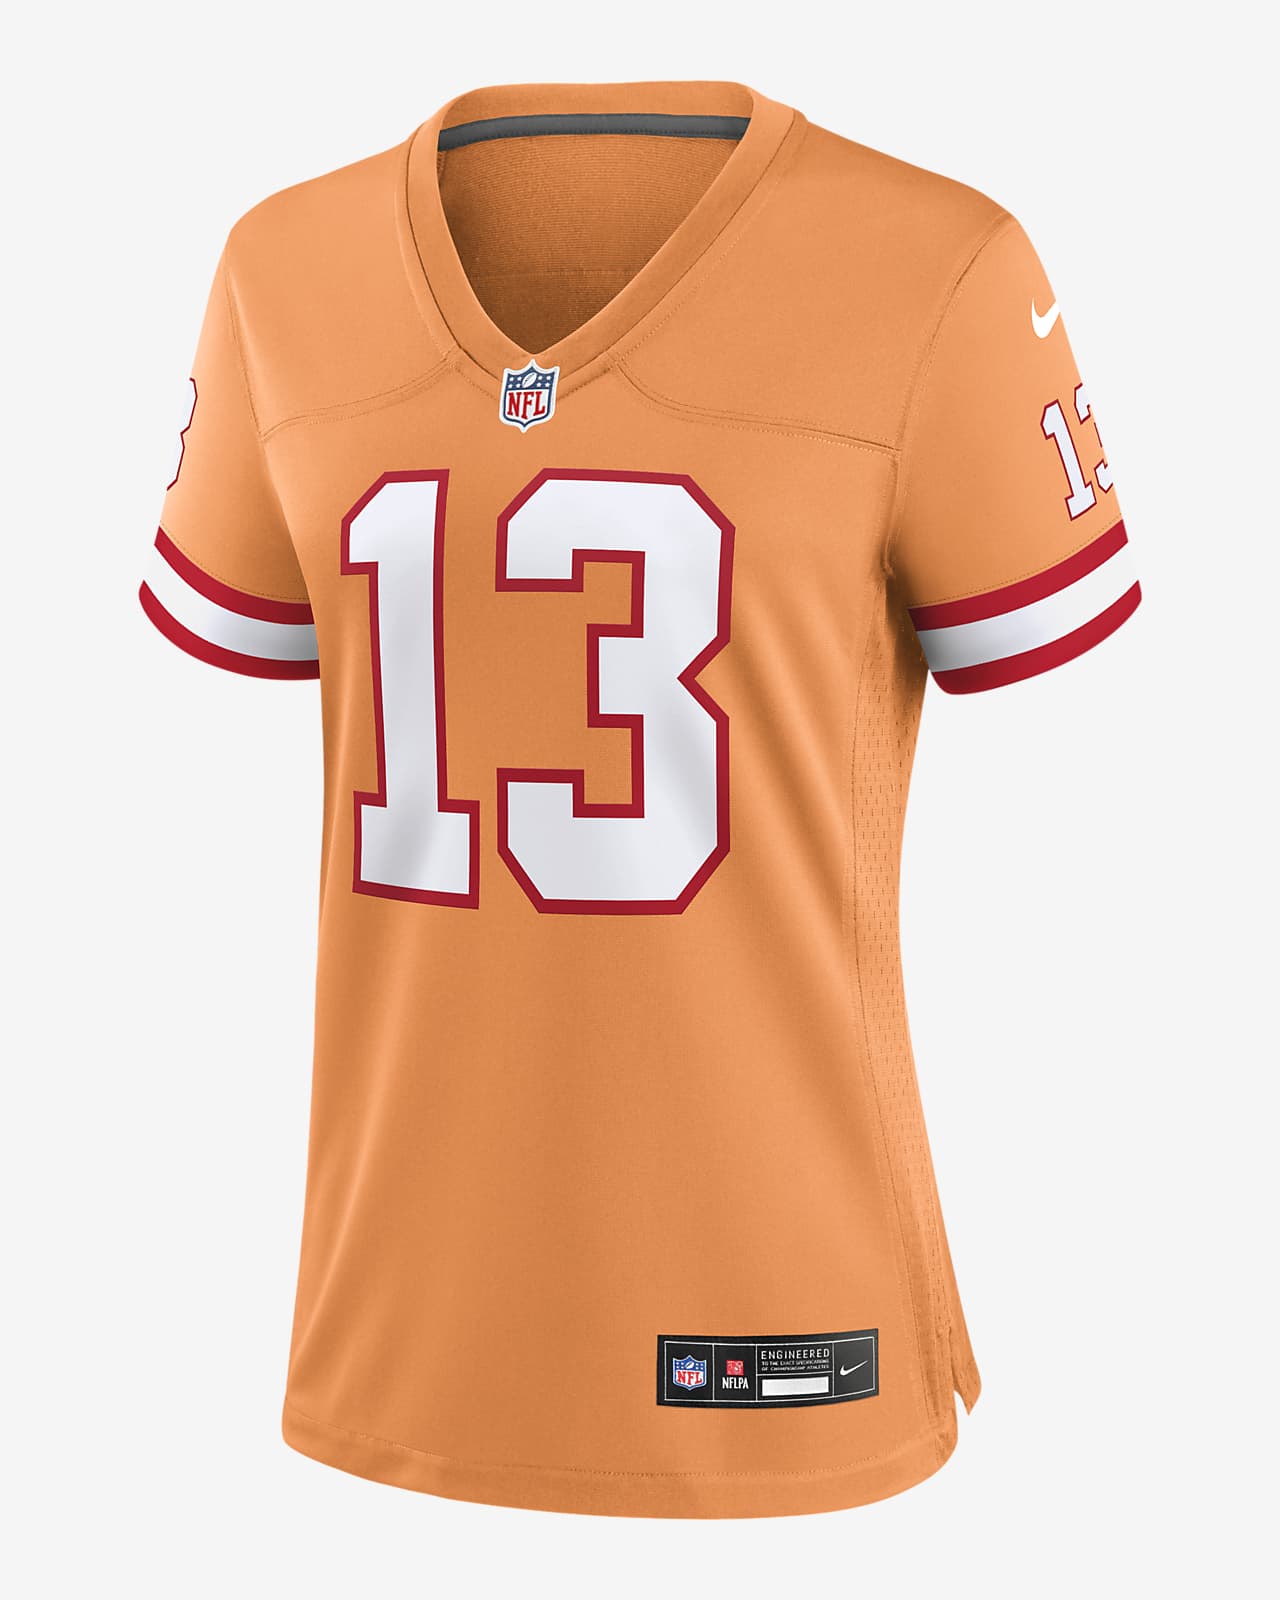 Mike Evans Tampa Bay Buccaneers Nike Women's NFL Game Football Jersey in Orange, Size: Large | 67NW01OS8BF-PY0